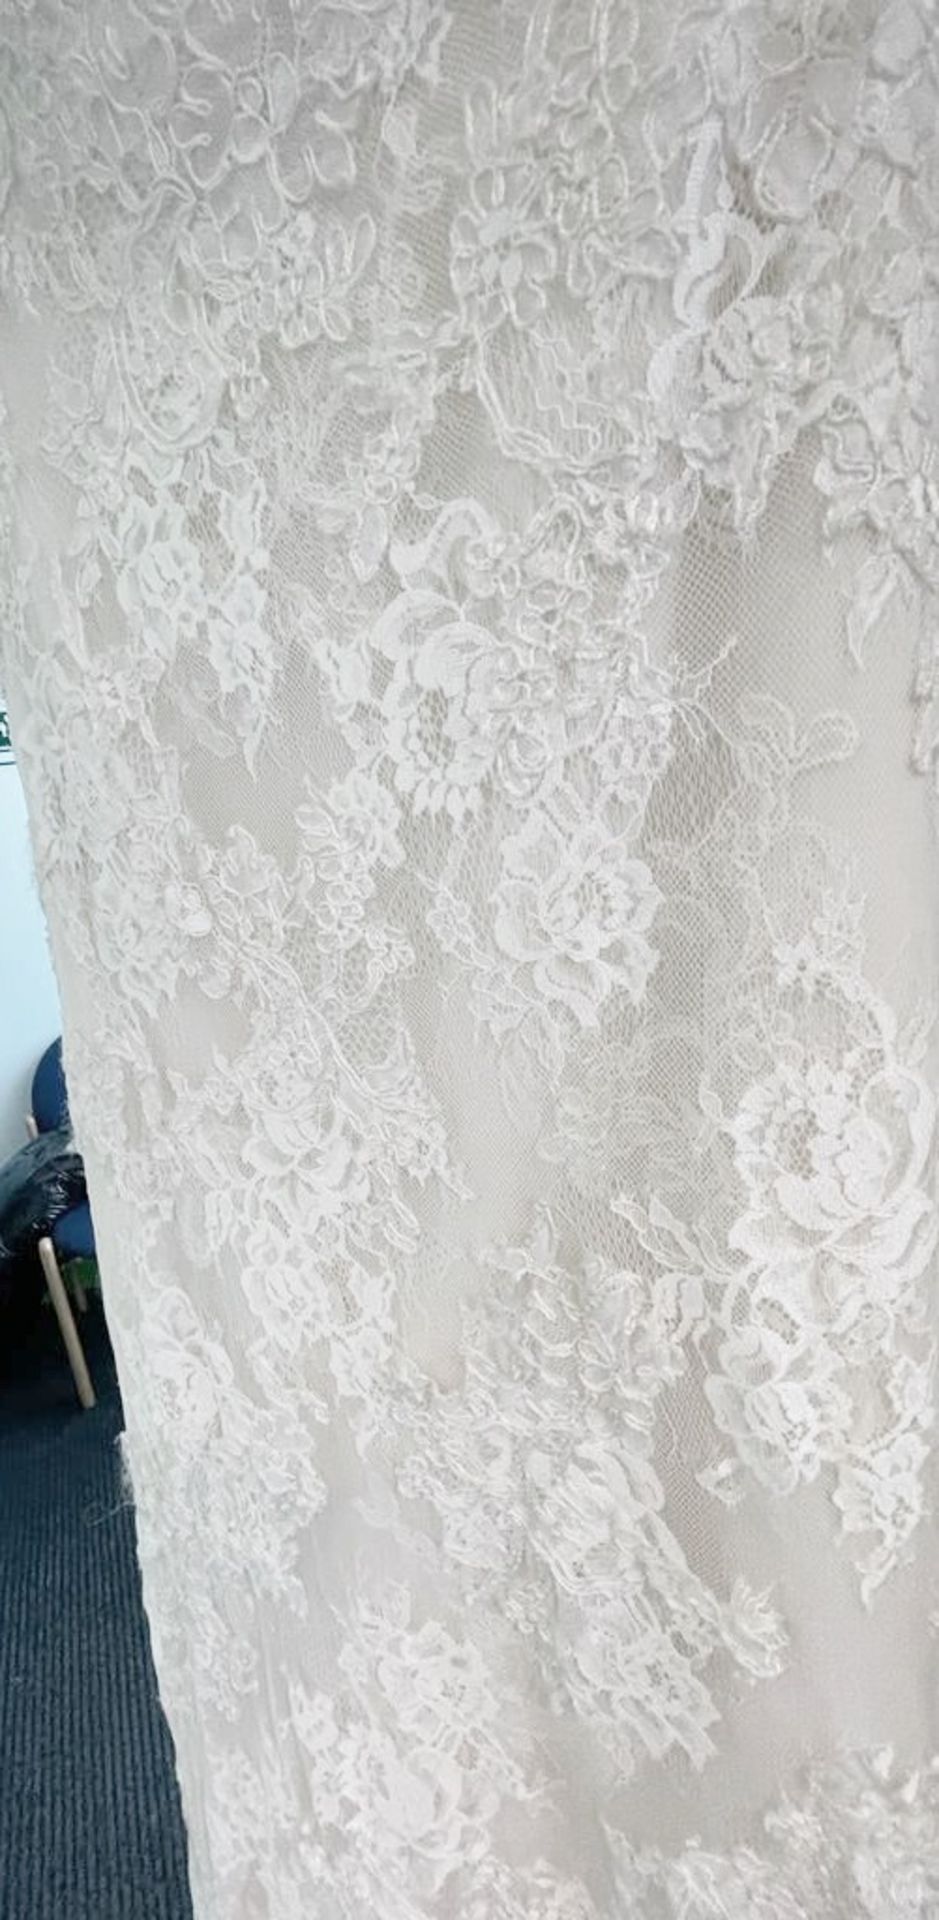 1 x LUSAN MANDONGUS 'Tabia' Fishtail Designer Wedding Dress Bridal Gown, With Chantilly Lace - Image 2 of 15